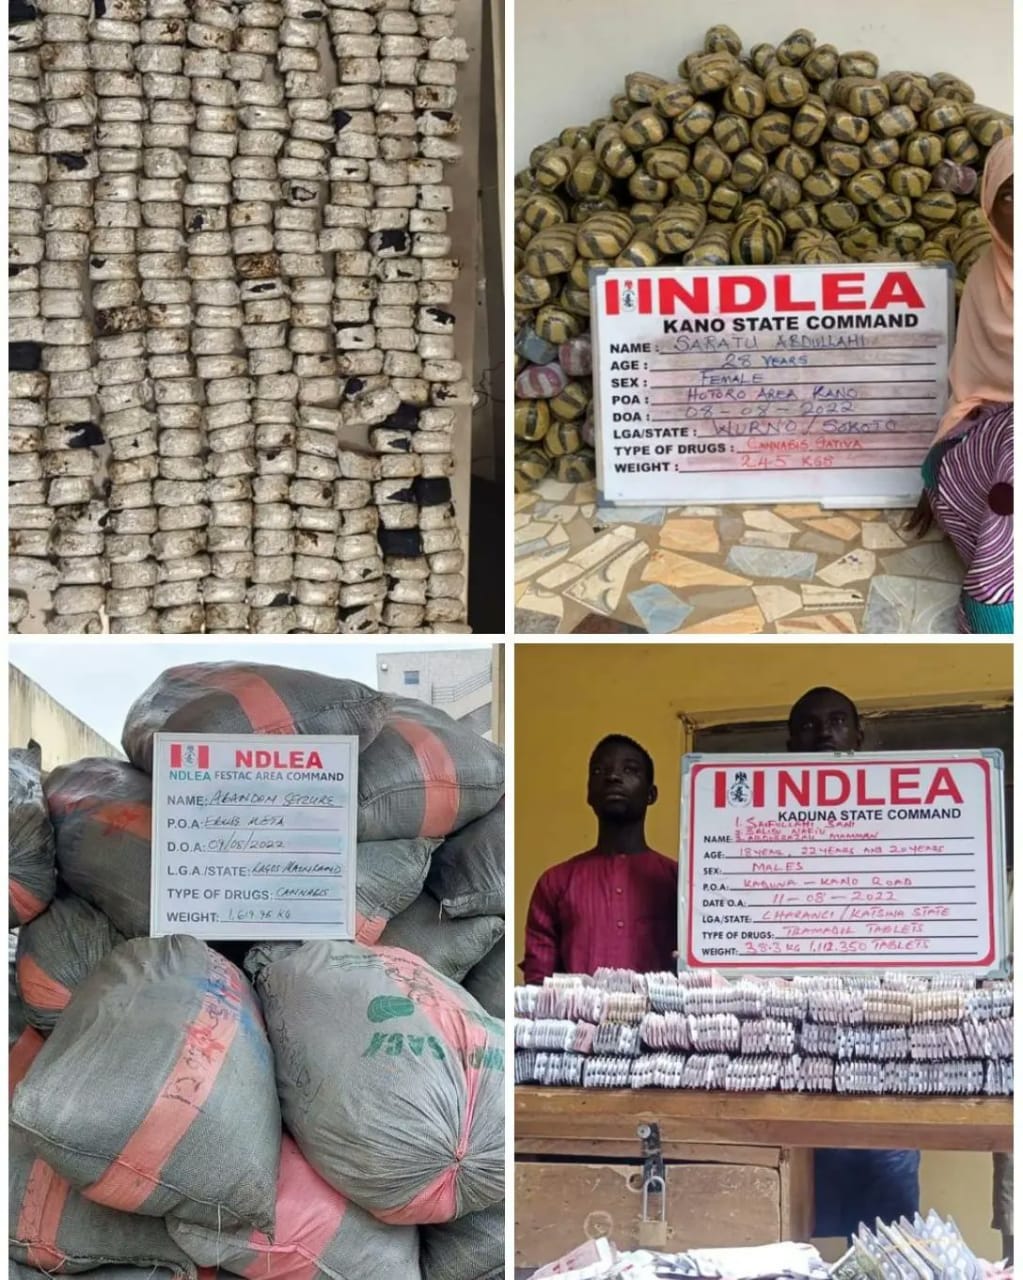 NDLEA uncovers 442 parcels of Crystal Meth in heads of smoked fish in Lagos as returnee excretes 77 wraps of Cocaine at Enugu Airport